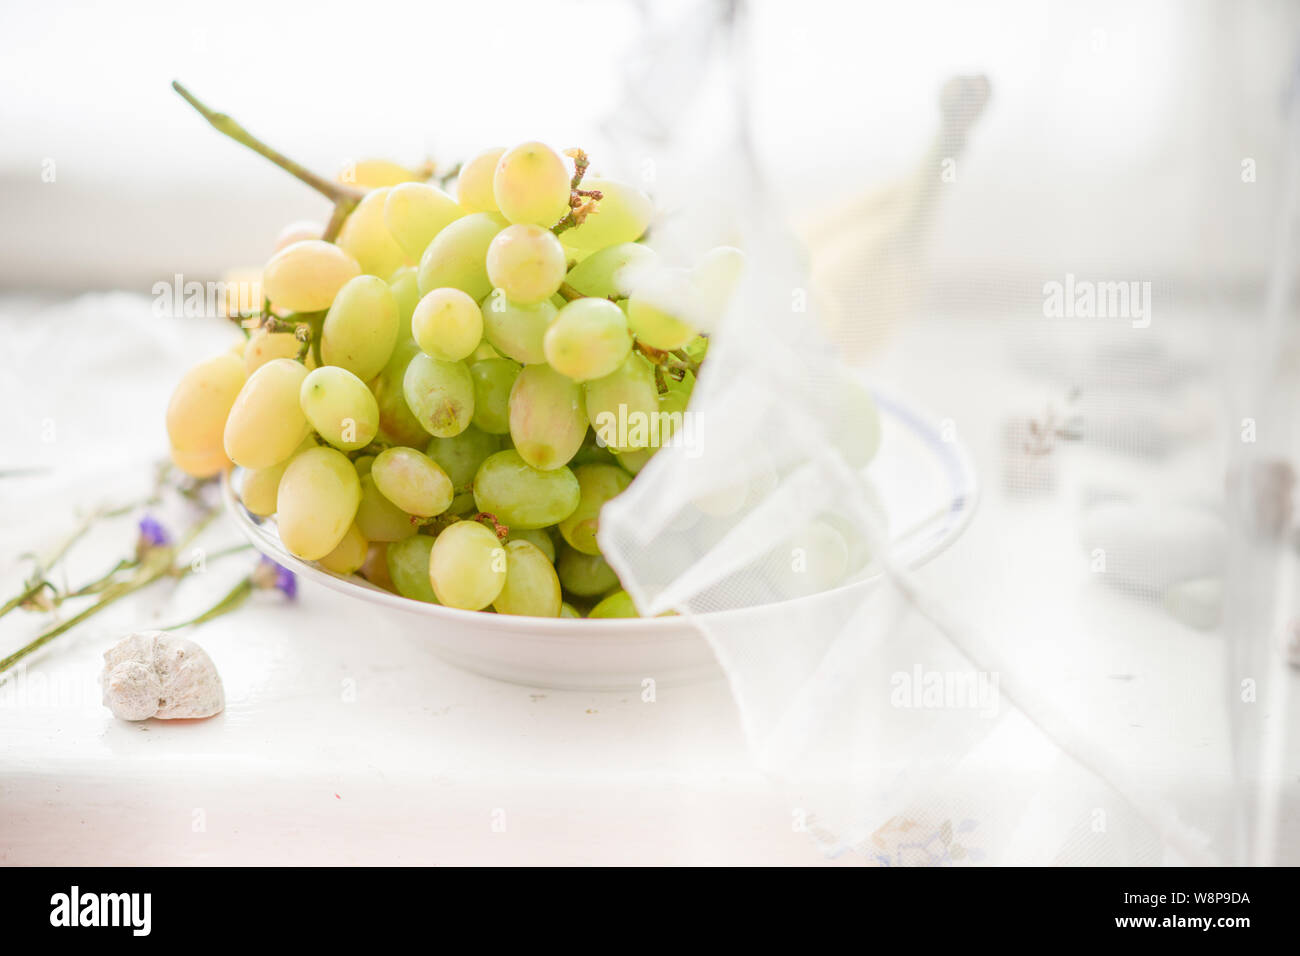 ripe green brush of grapes in a plate on a windowsill. Stock Photo